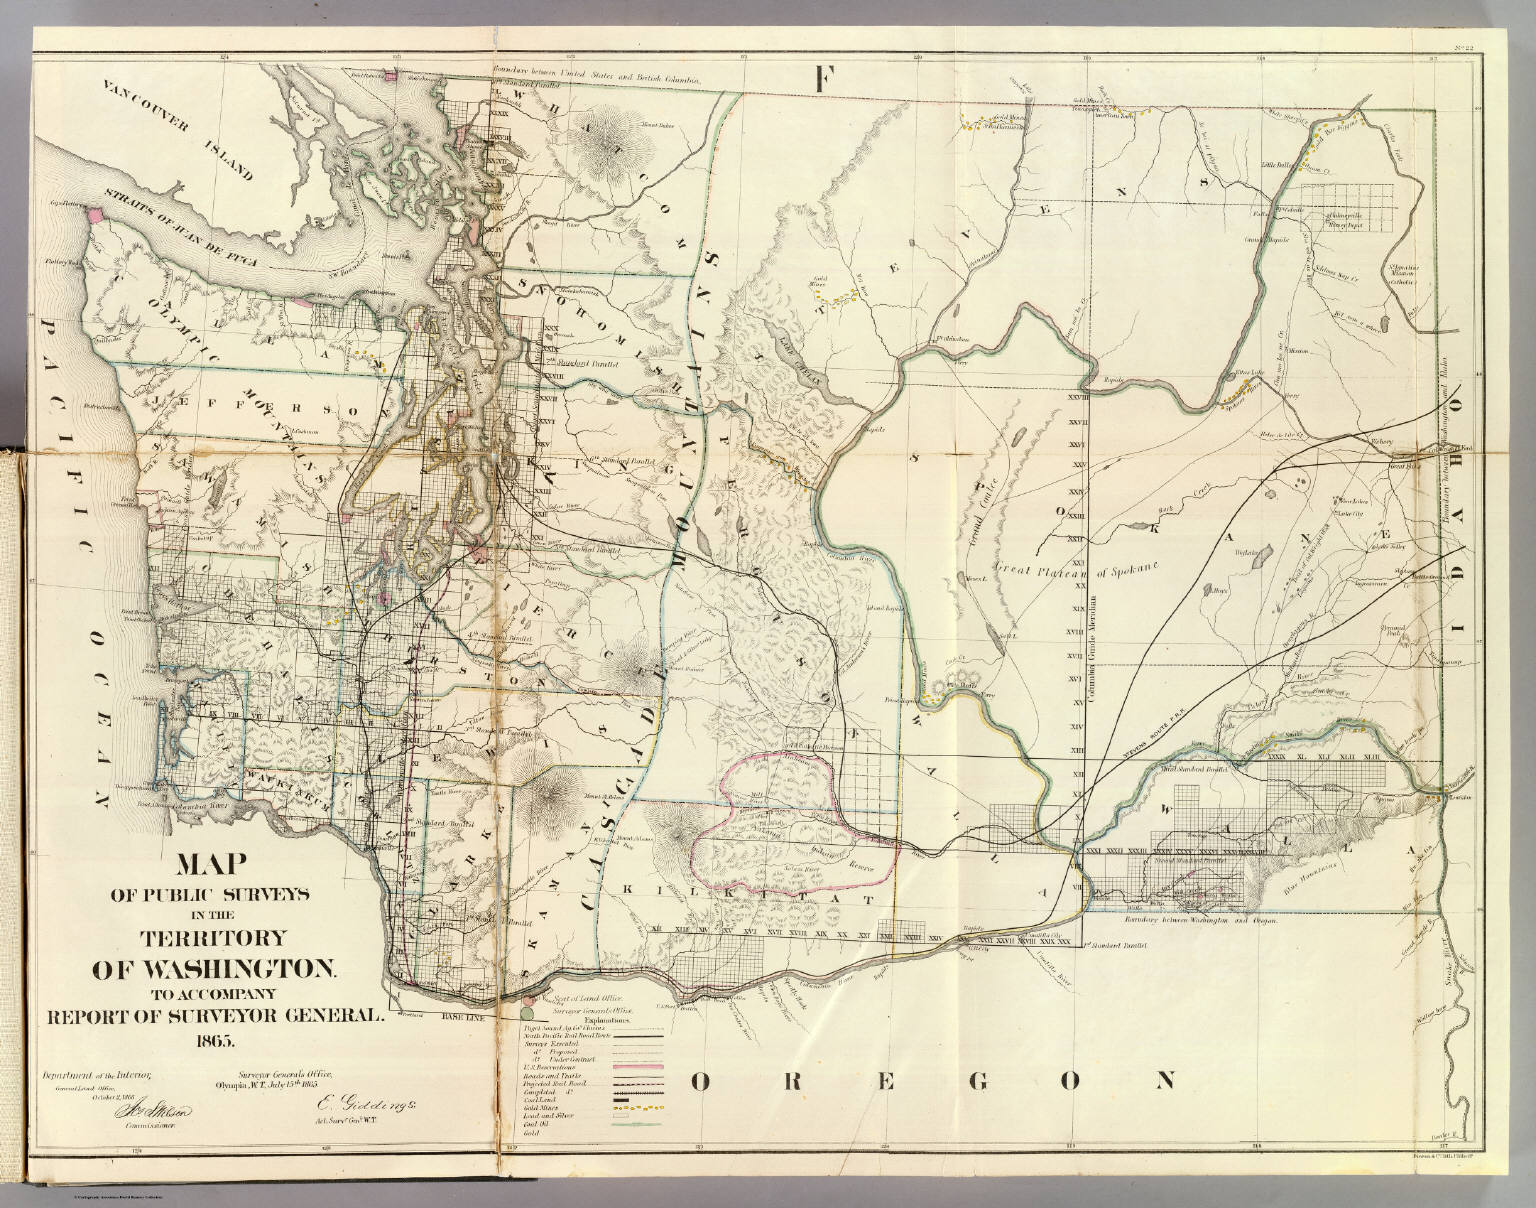 Washington Territory. - David Rumsey Historical Map Collection